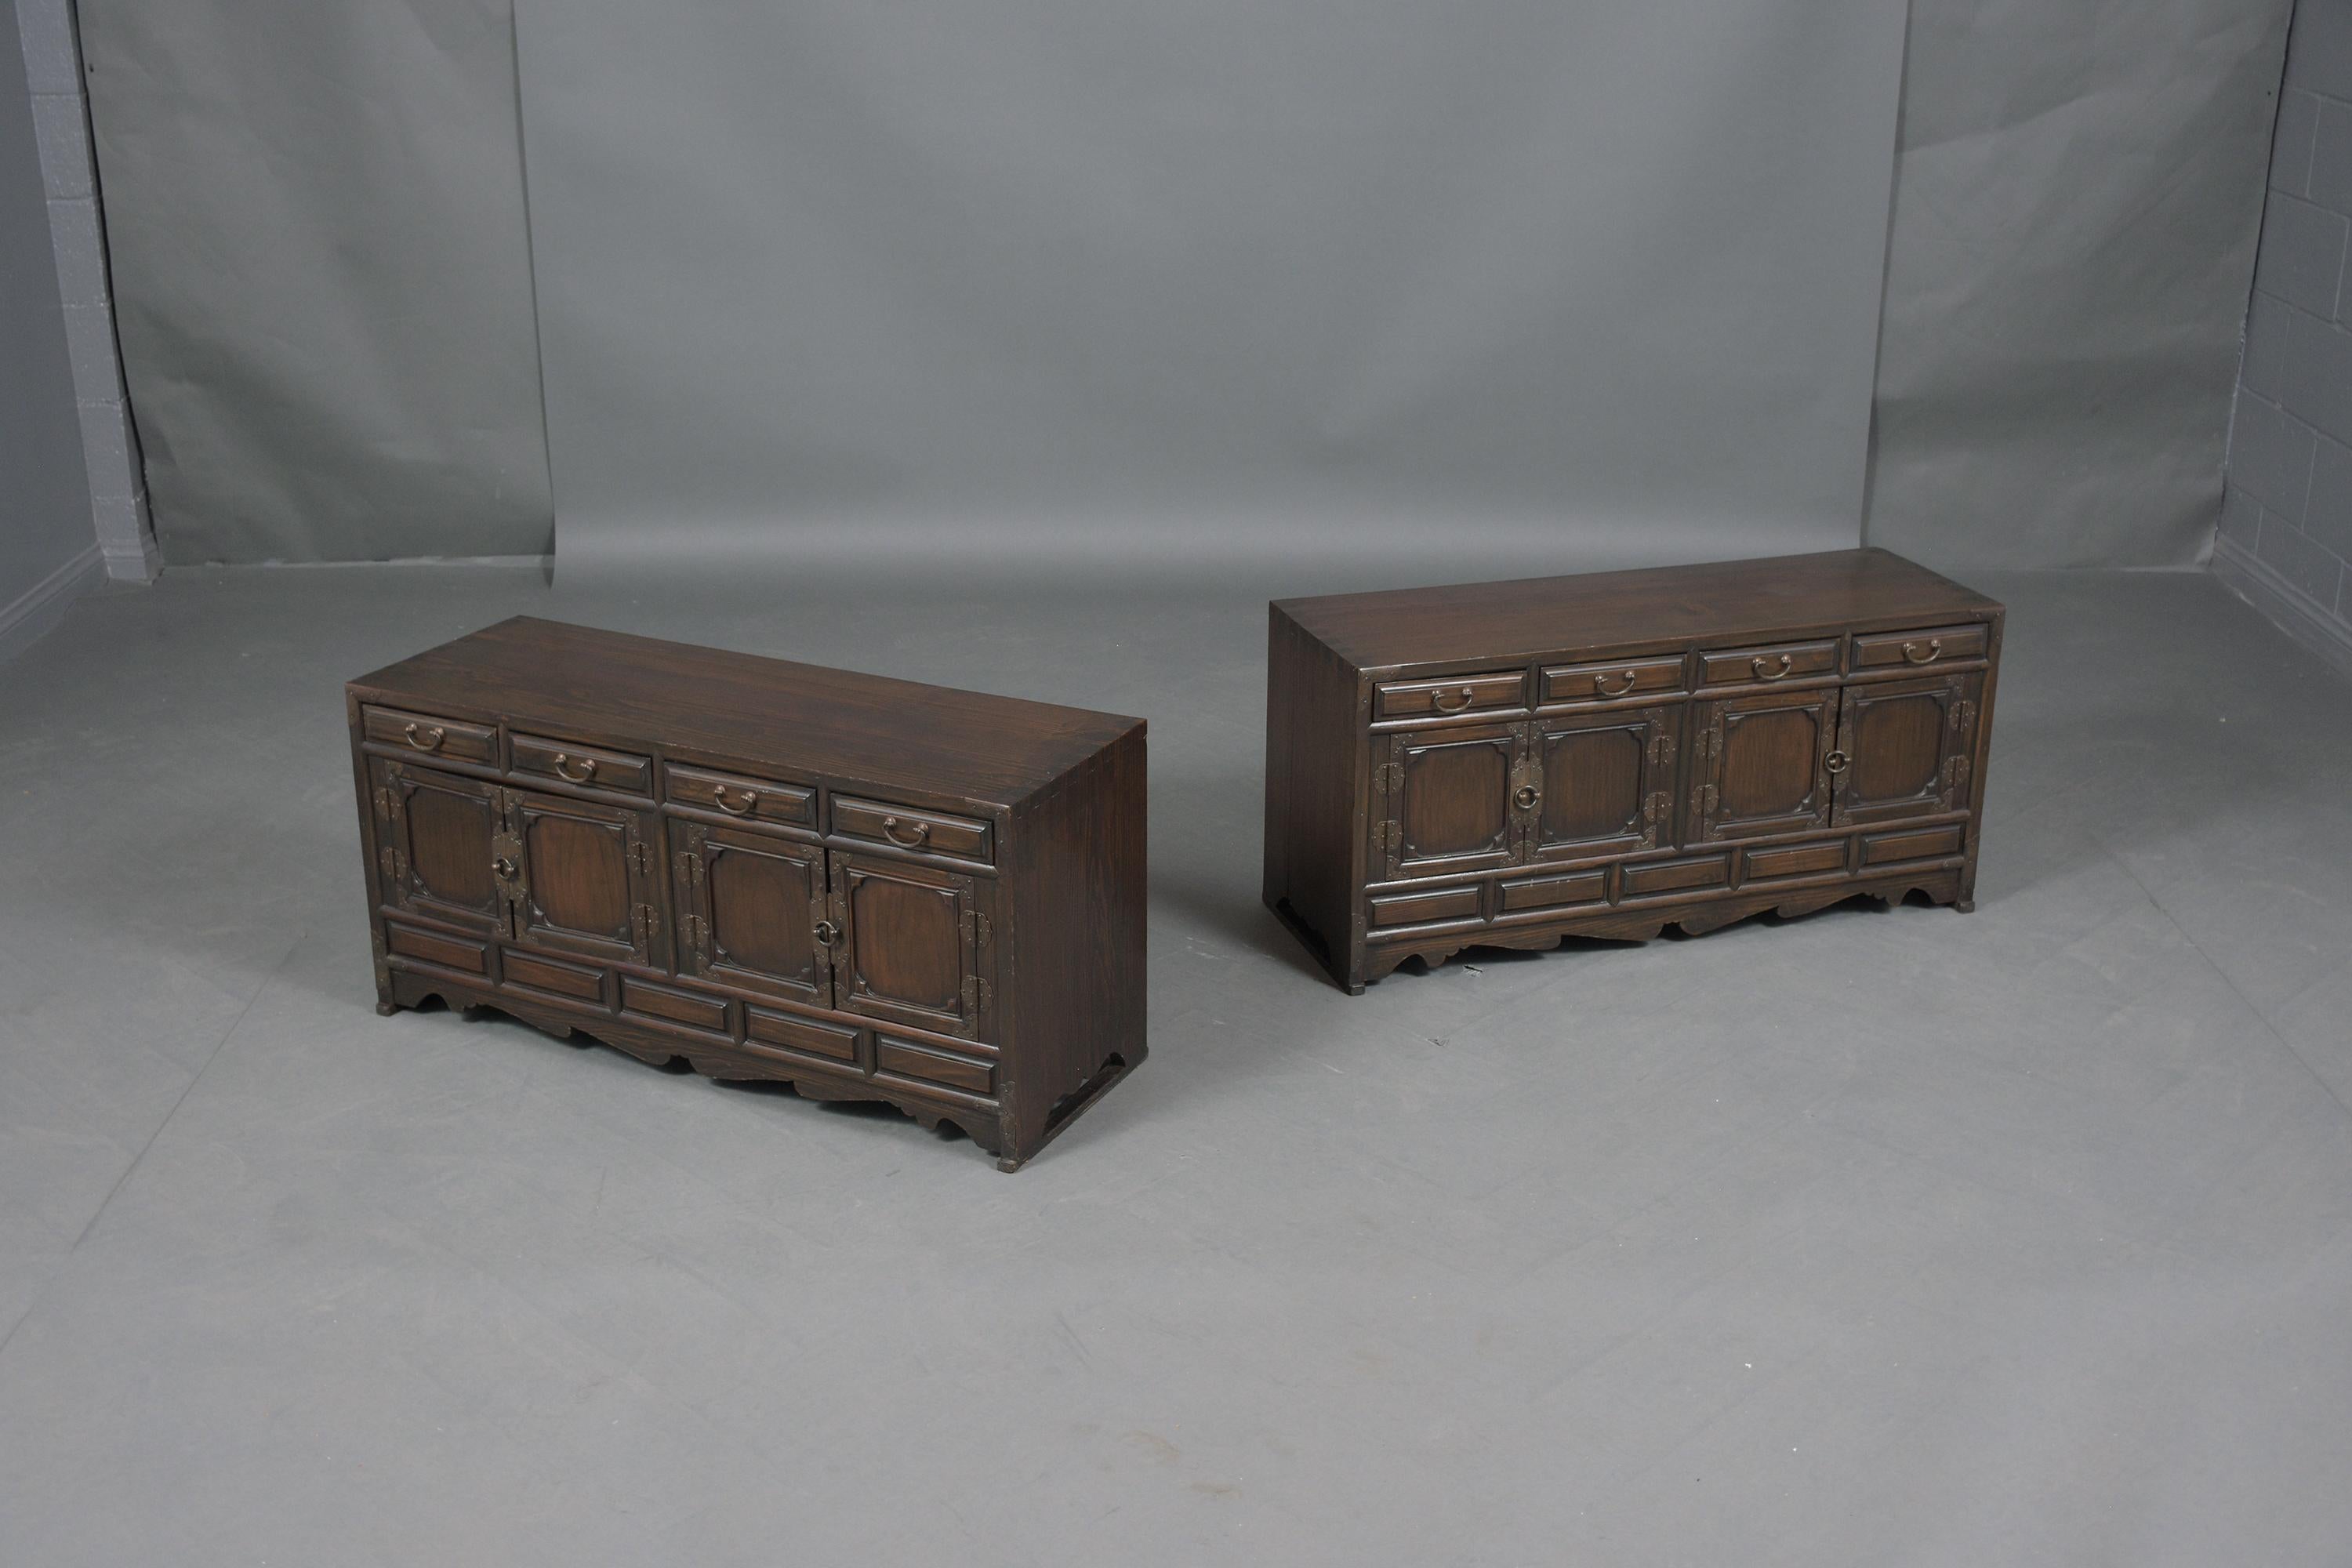 An extraordinary pair of oriental cabinets hand-crafted out of elmwood in good condition and professionally restored by our expert team of craftsmen. This fabulous pair of low dressers features a dark walnut color finish that has been only waxed and